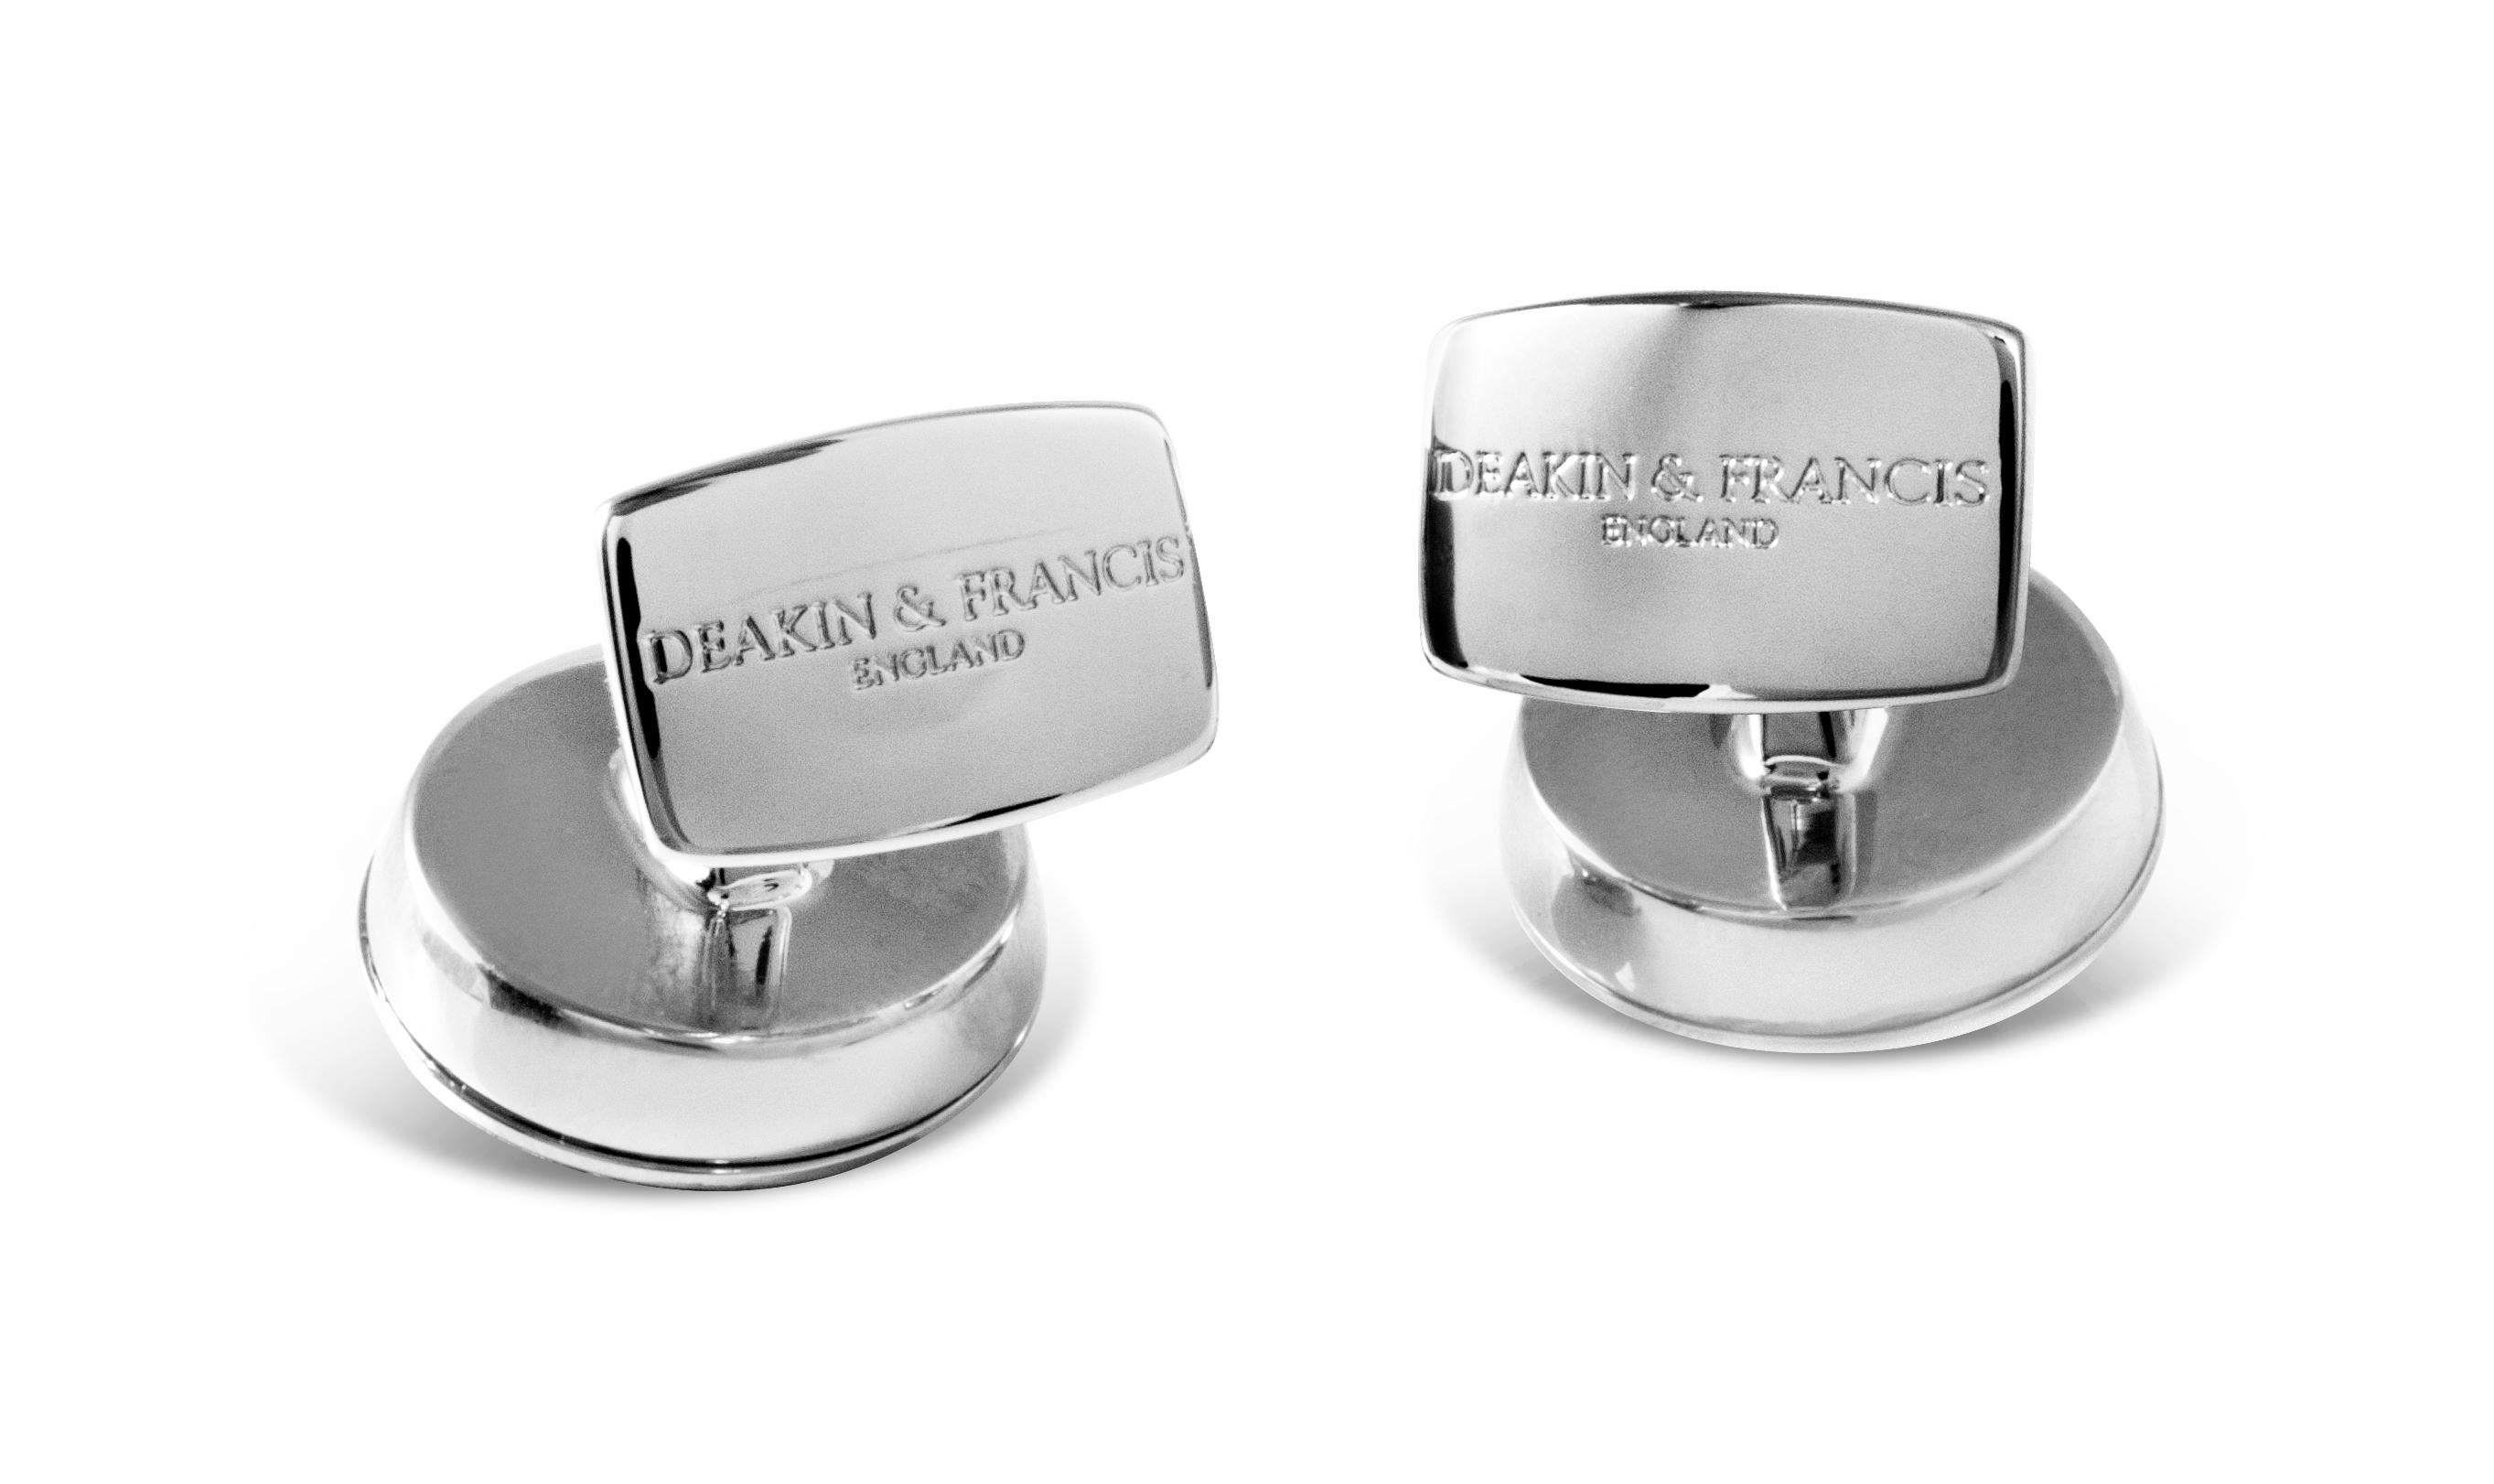 DEAKIN & FRANCIS, Piccadilly Arcade, London

Fashionably retro, the hexagonal shape and the reed and ribbon border of these detailed cufflinks is perfect if you are looking for a sophisticated look with a touch of vintage. Choose from light, bright